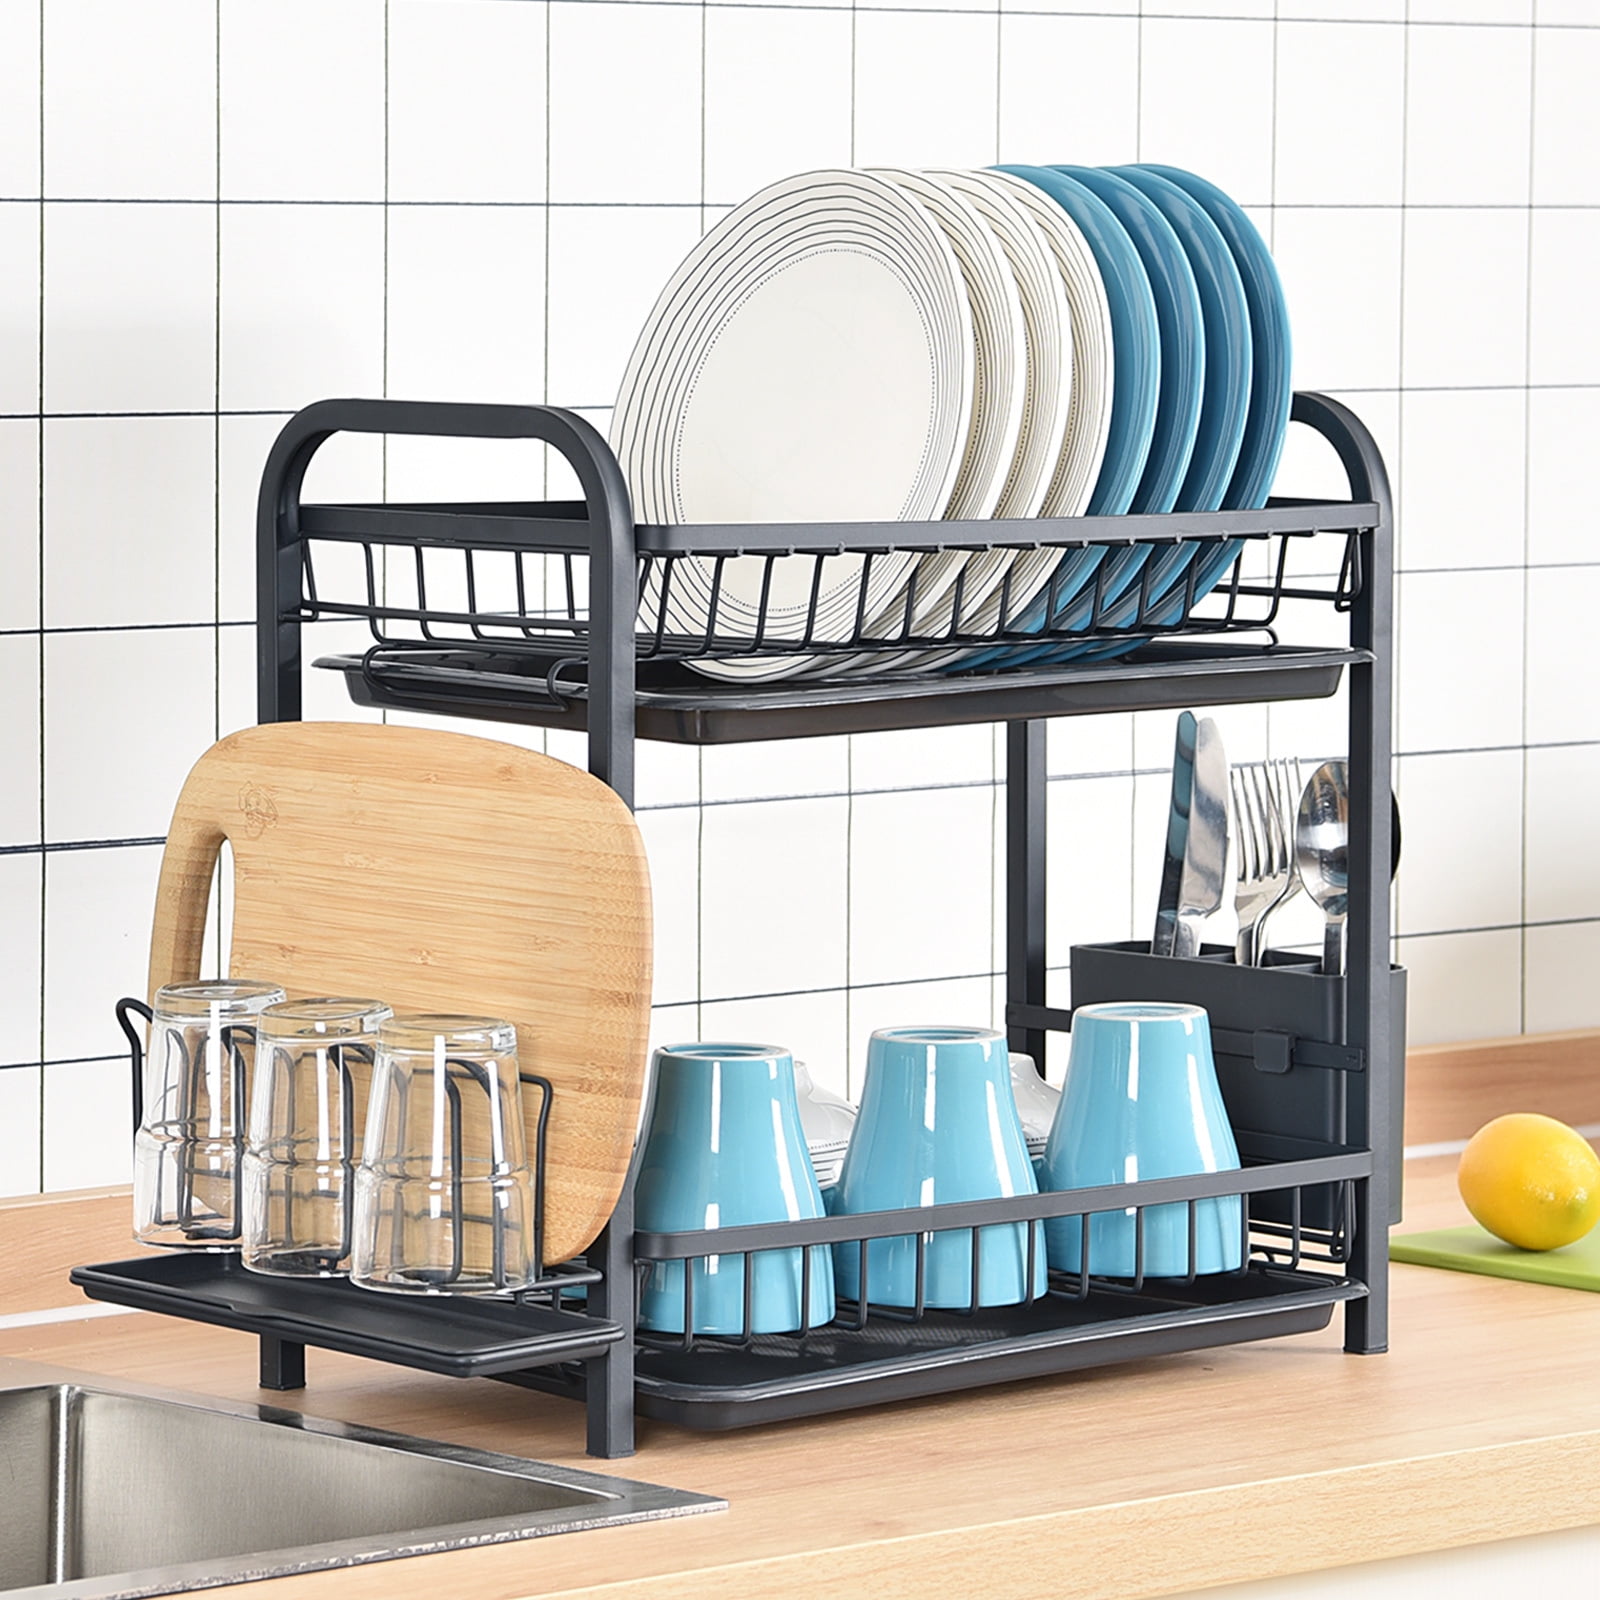 1pc, Dishes Storage Rack, Dinner Plate Holder Storage, Plate Cradle  Organizer With Drying Drainer, Salad/Dessert Plate Organizer, Plate Rack  Cradle, K